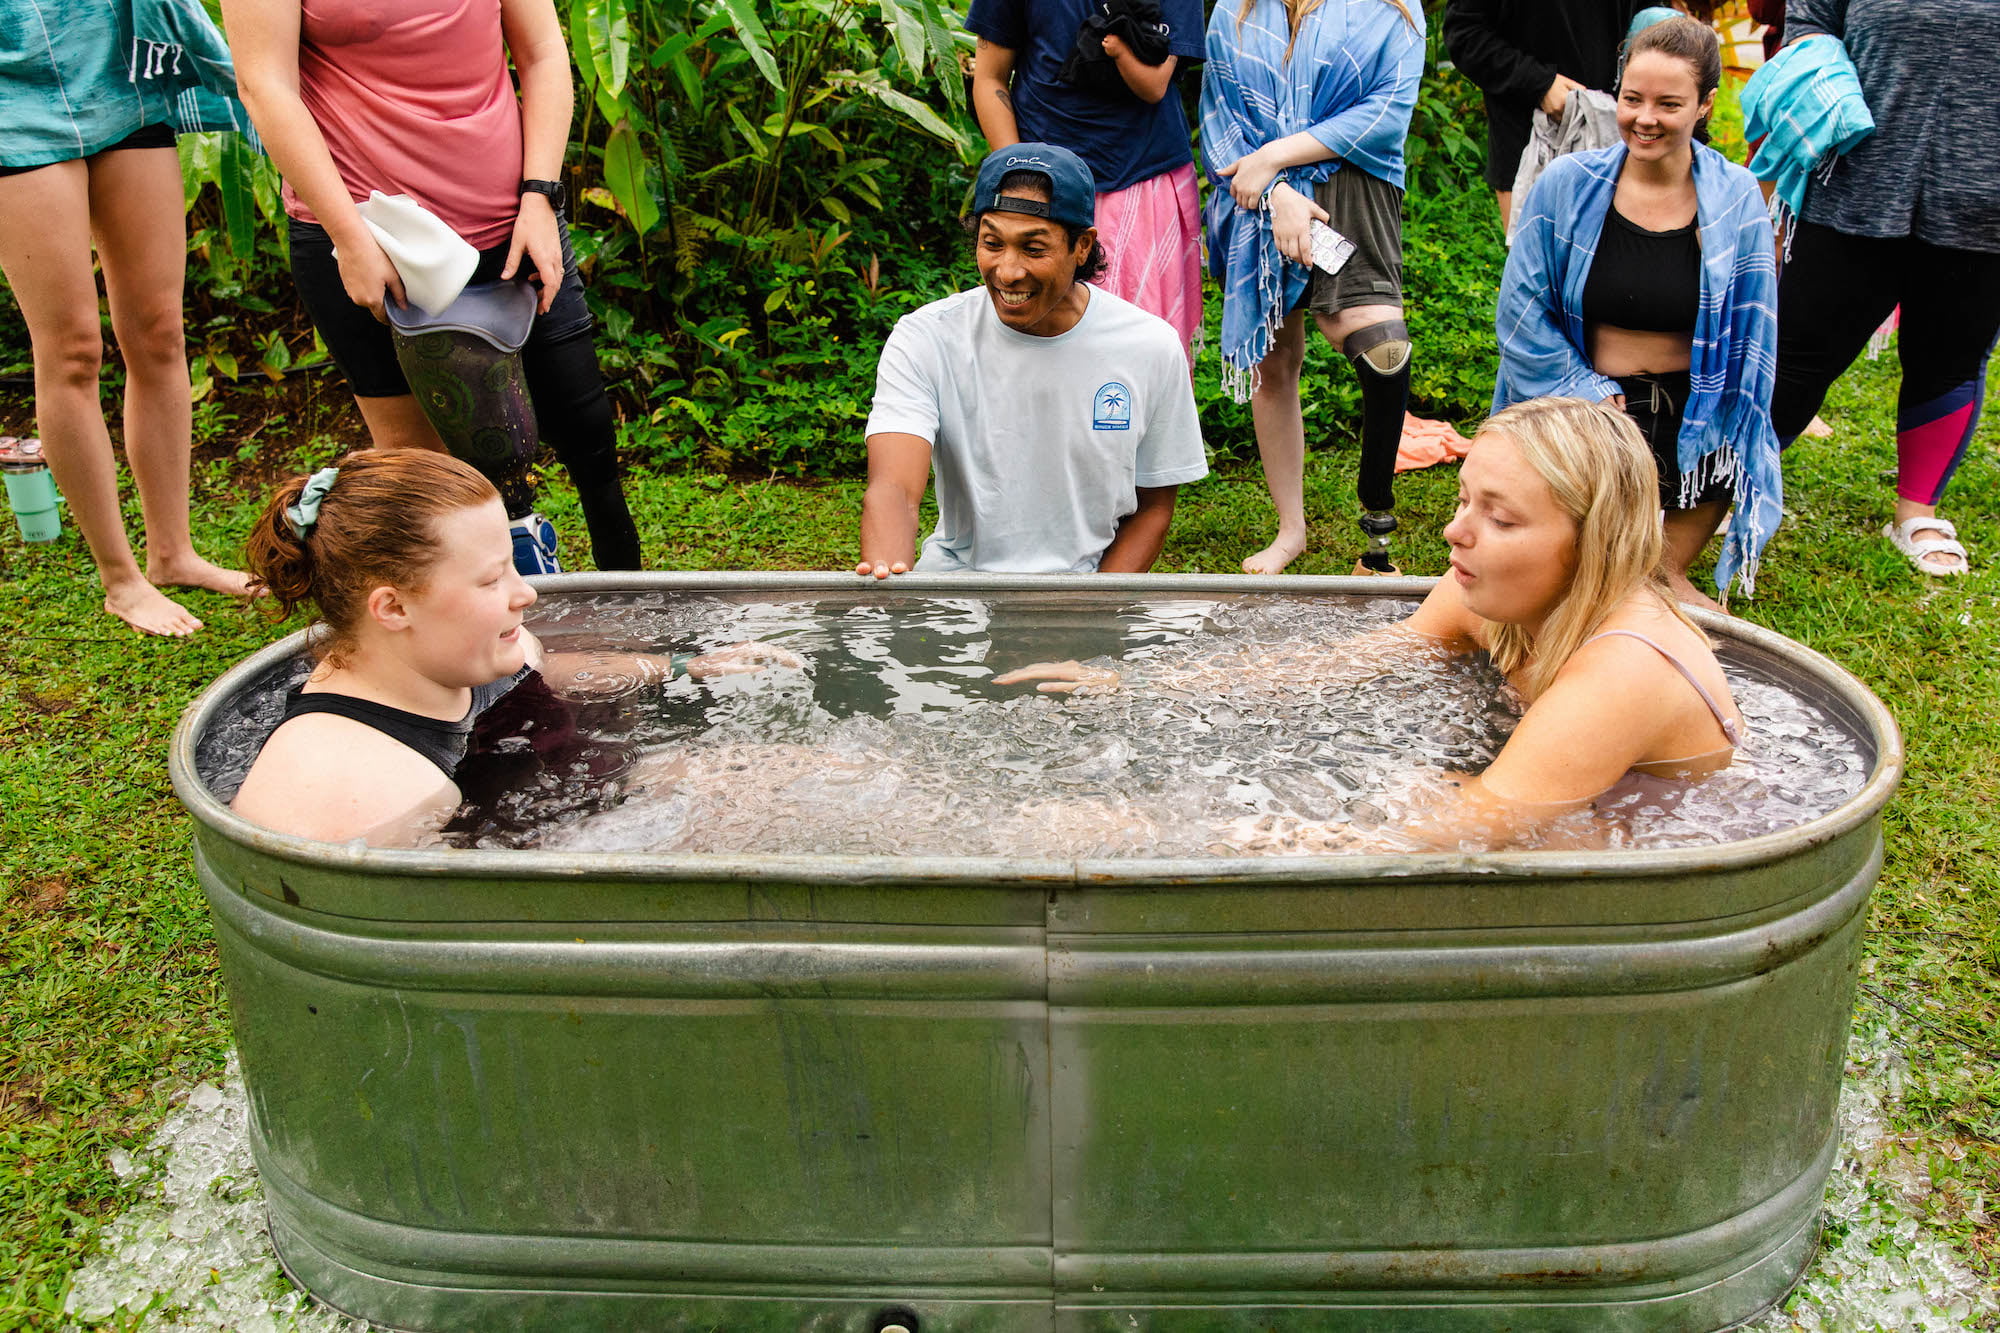 Retreat attendees spending one minute in the ice bath